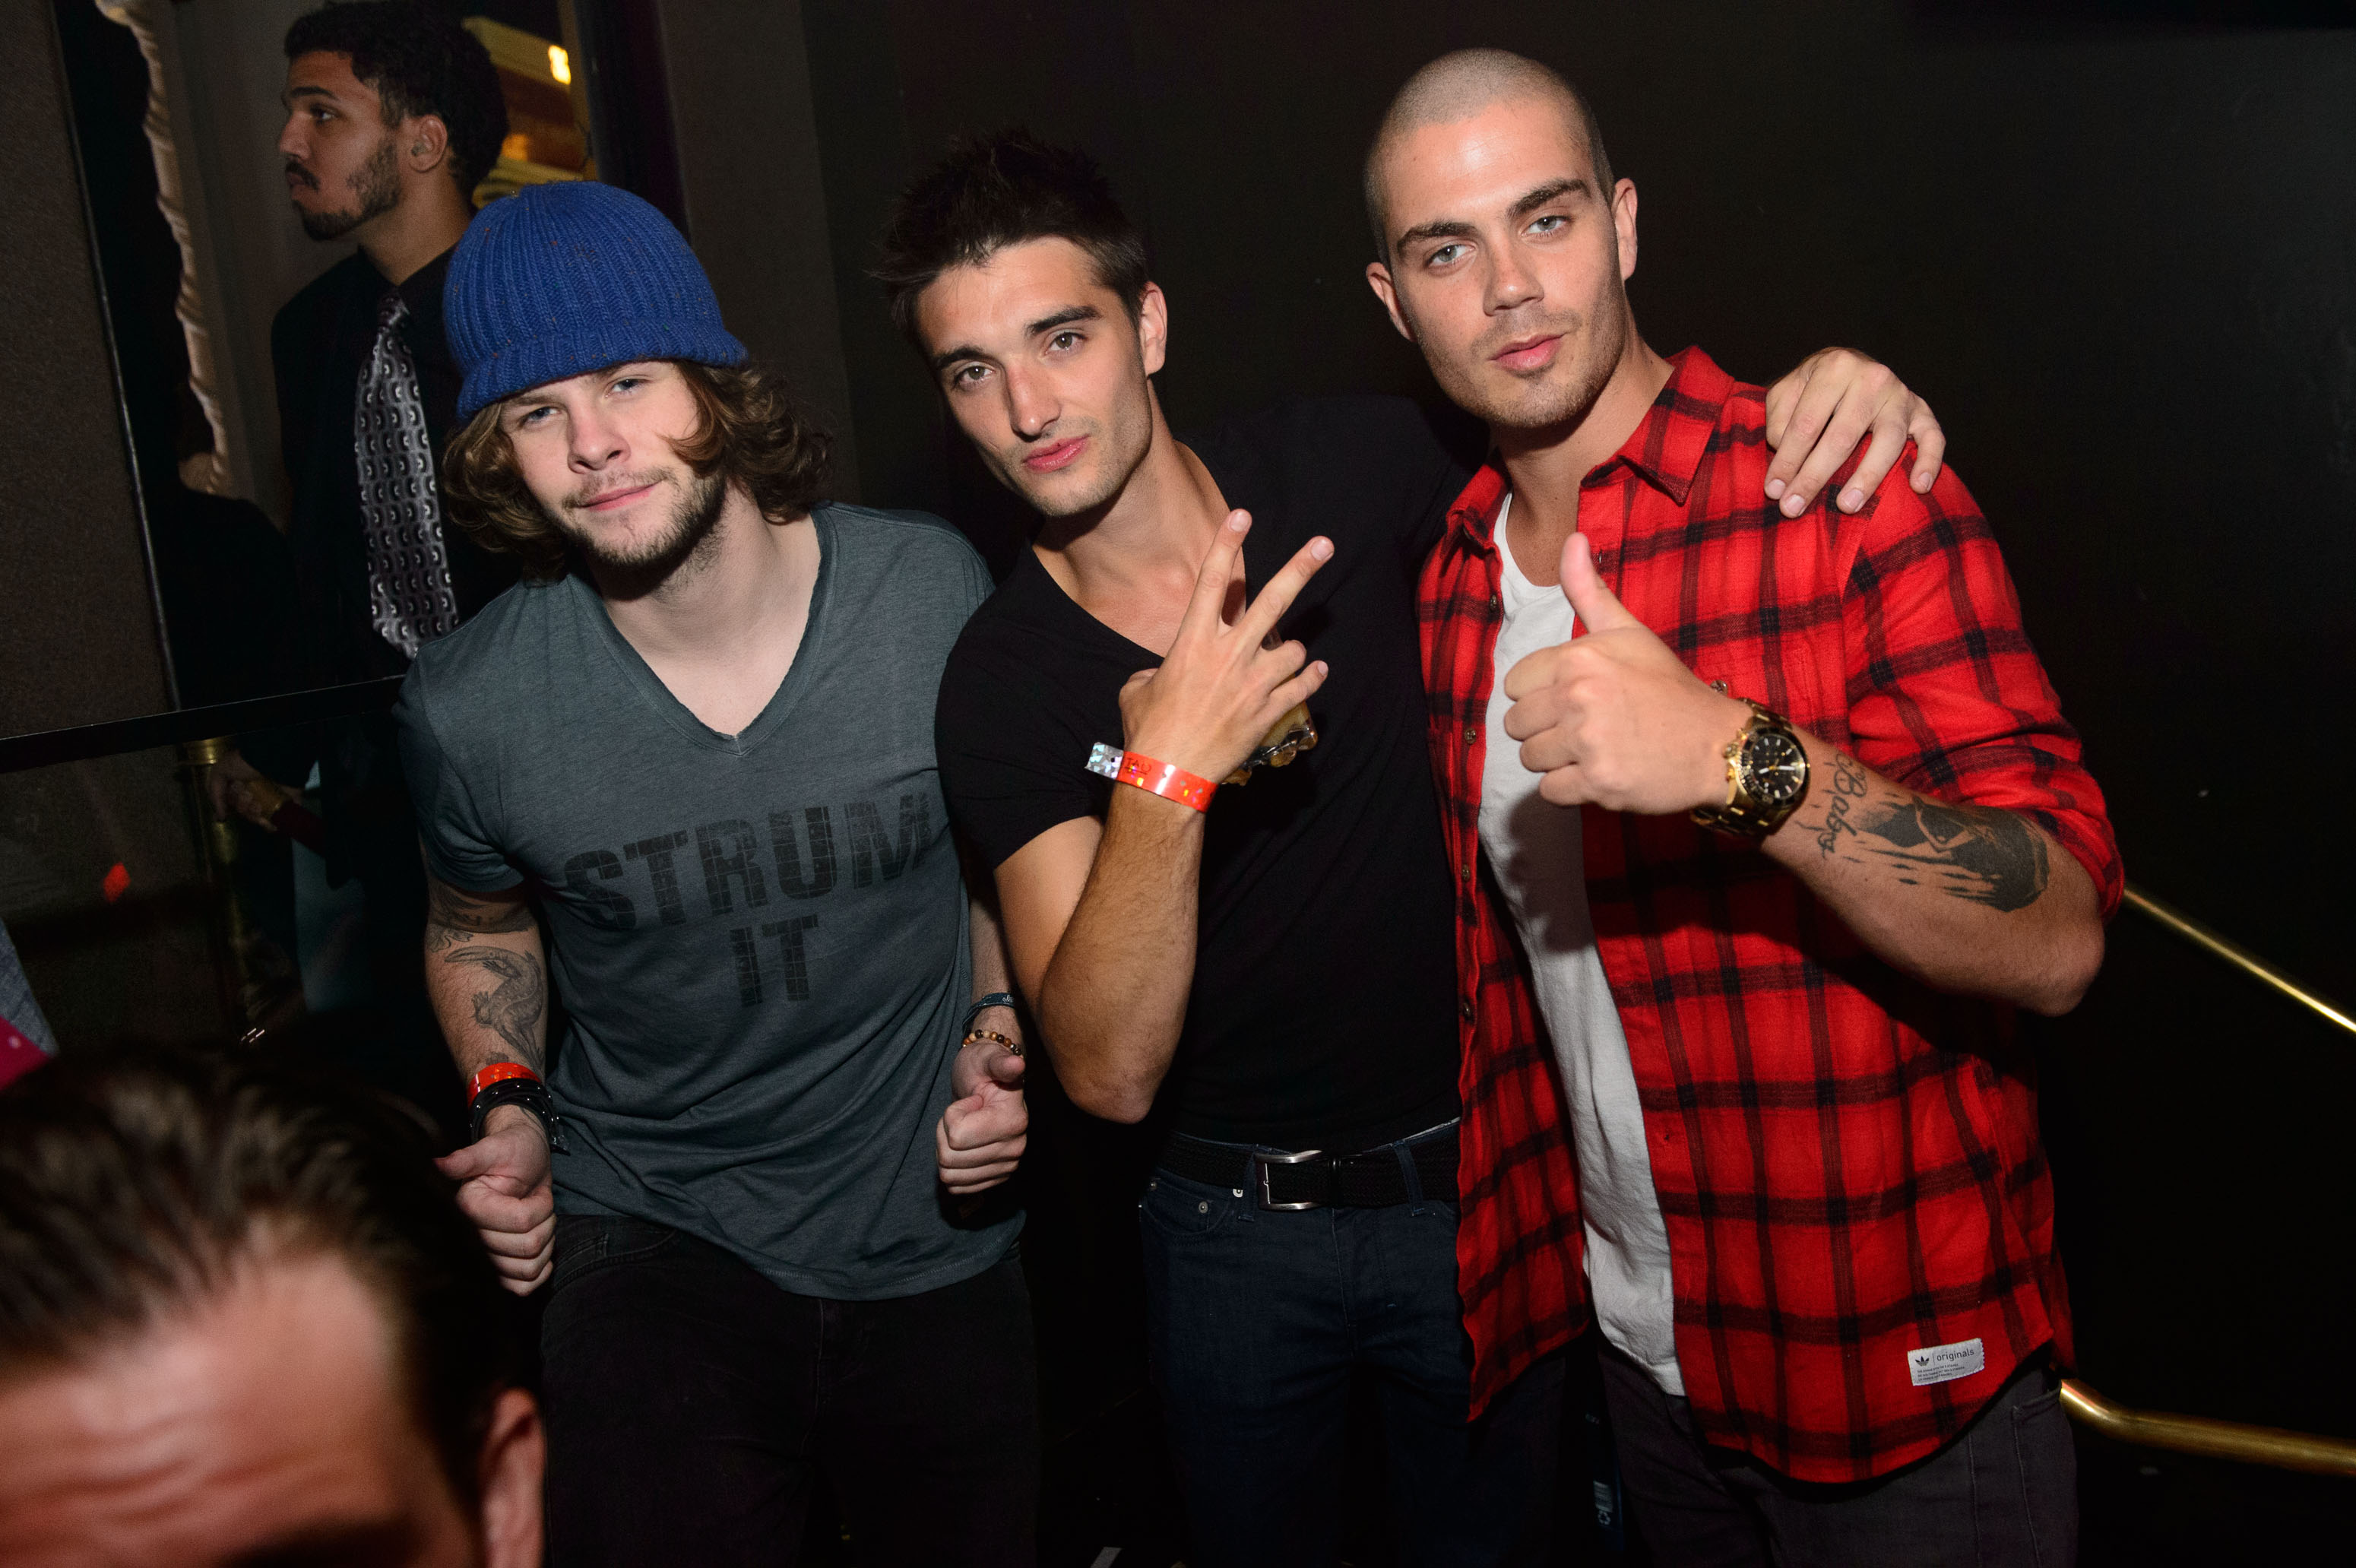 The Wanted - TAO - photo by Al Powers/PowersImagery